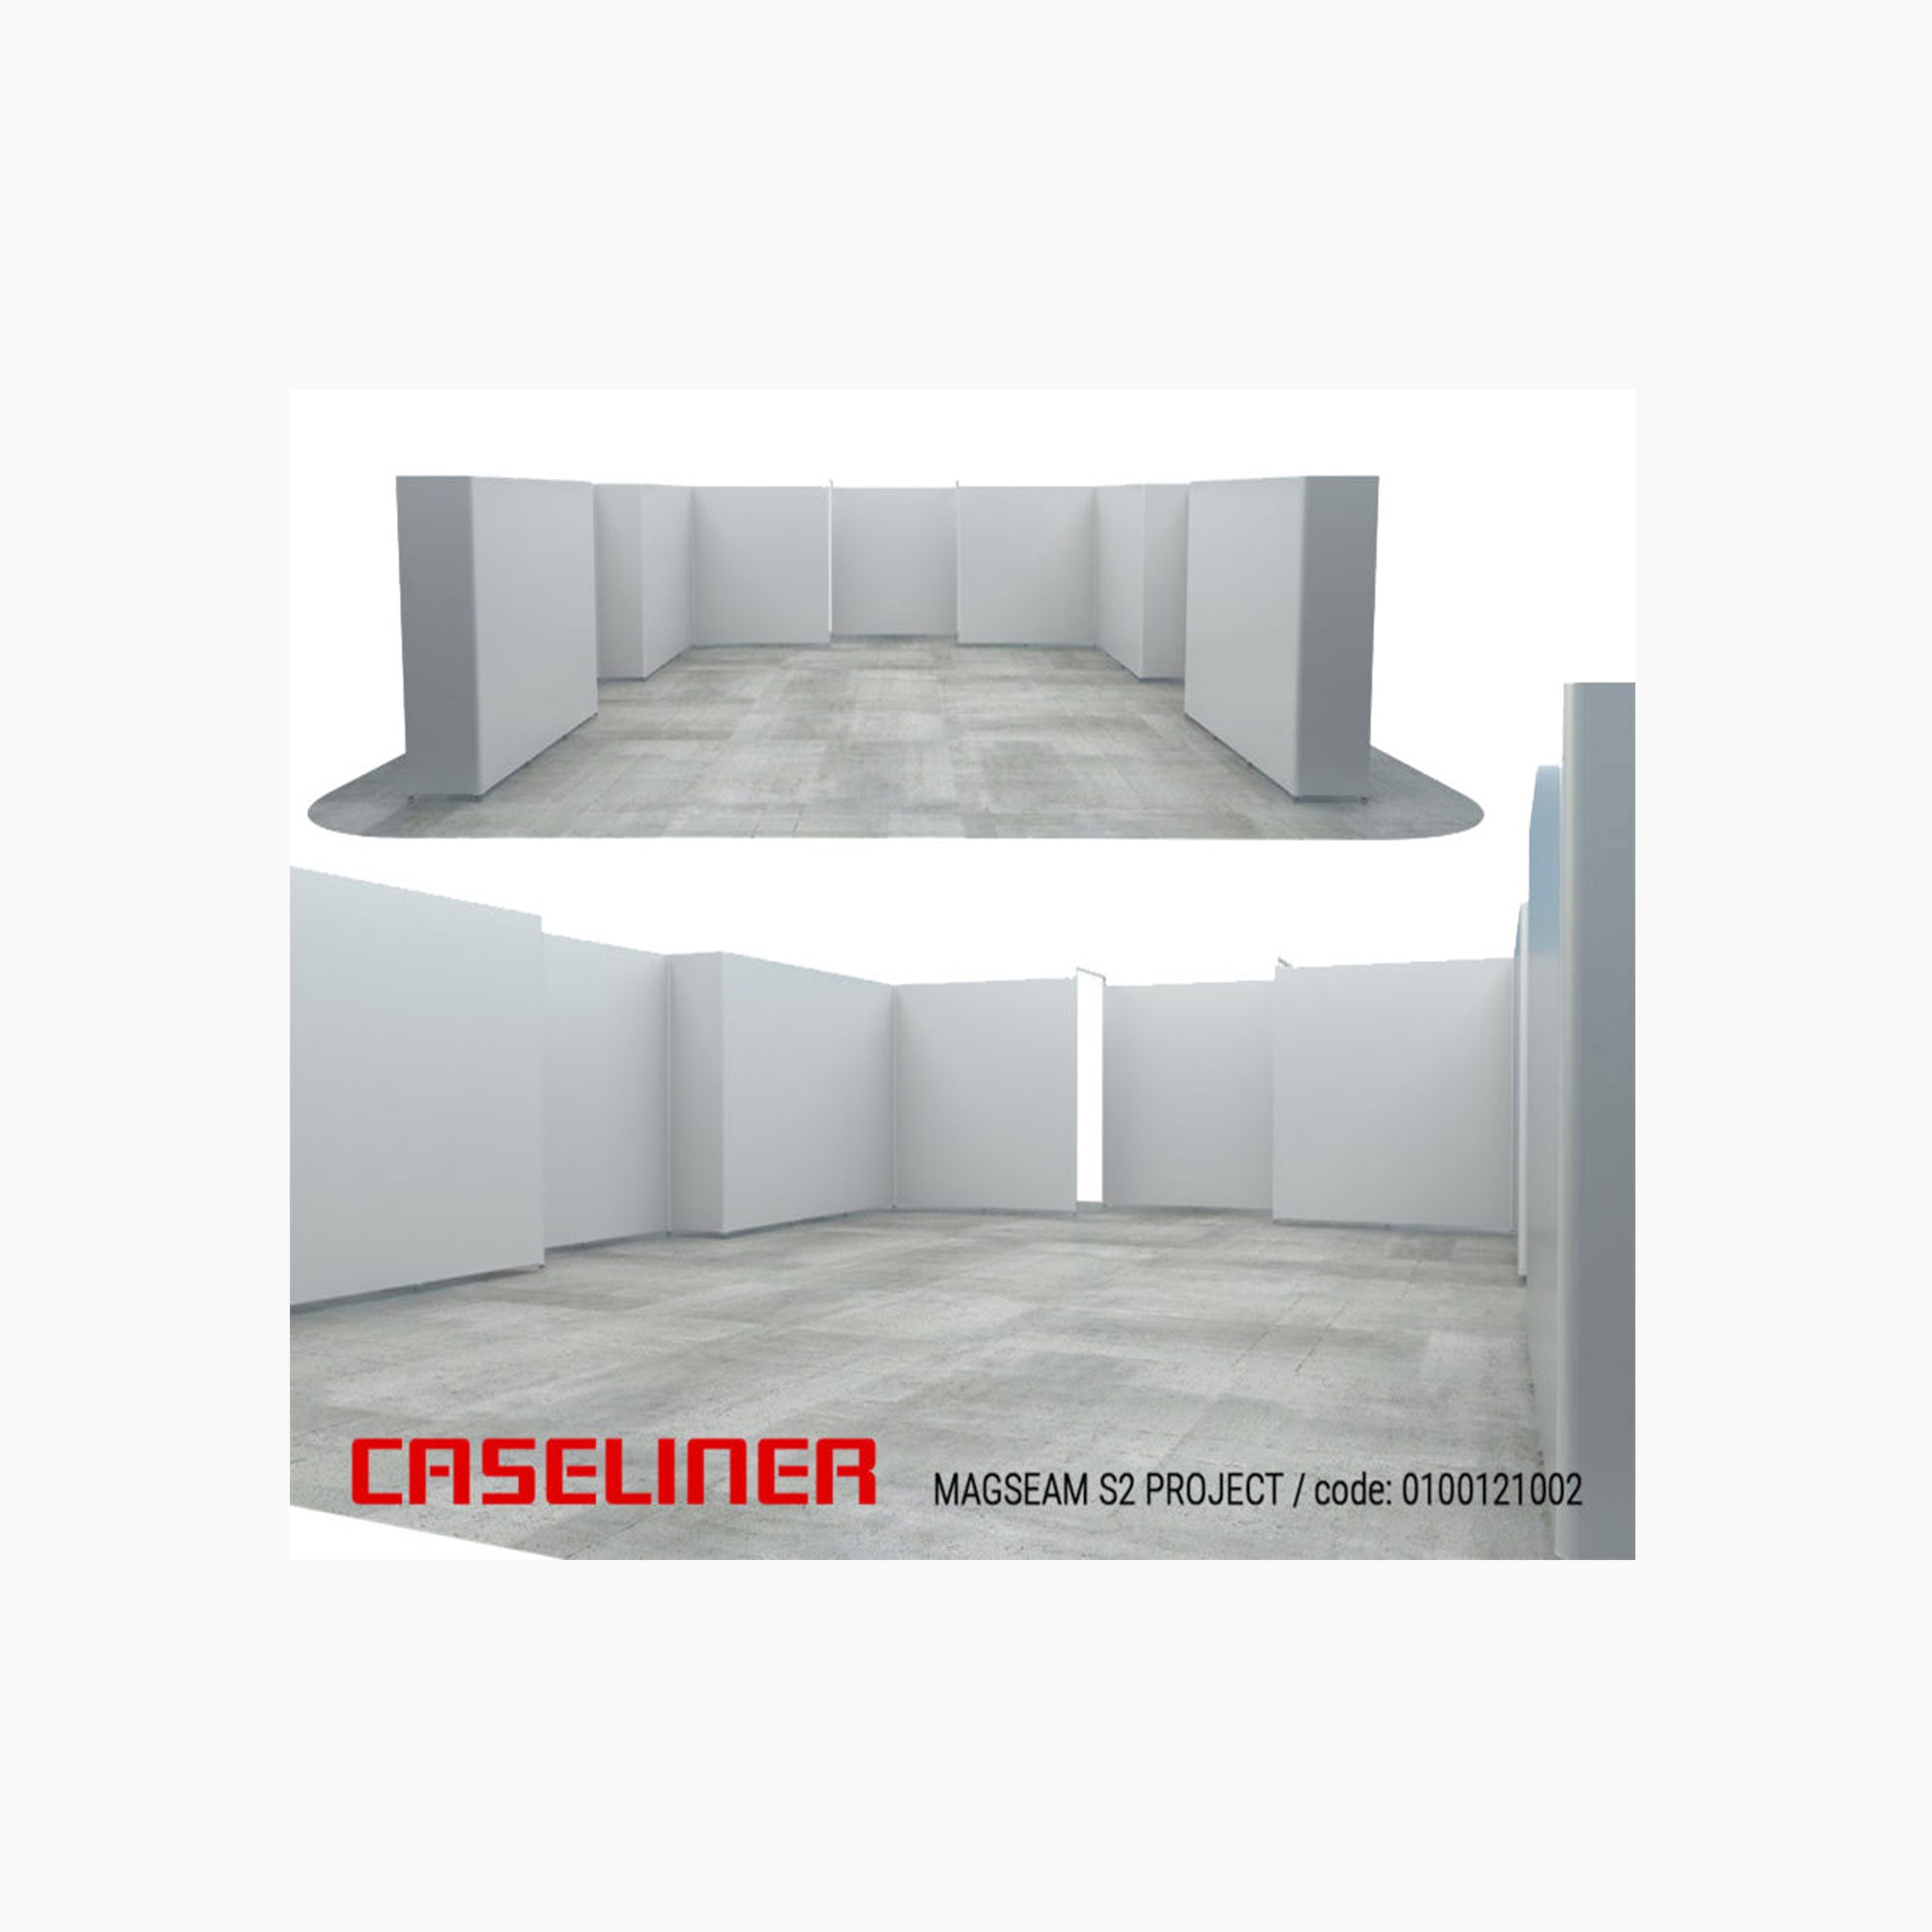 Caseliner | MAGSEAM Project S/N-Magseam Walling-Caseliner-gpx-store